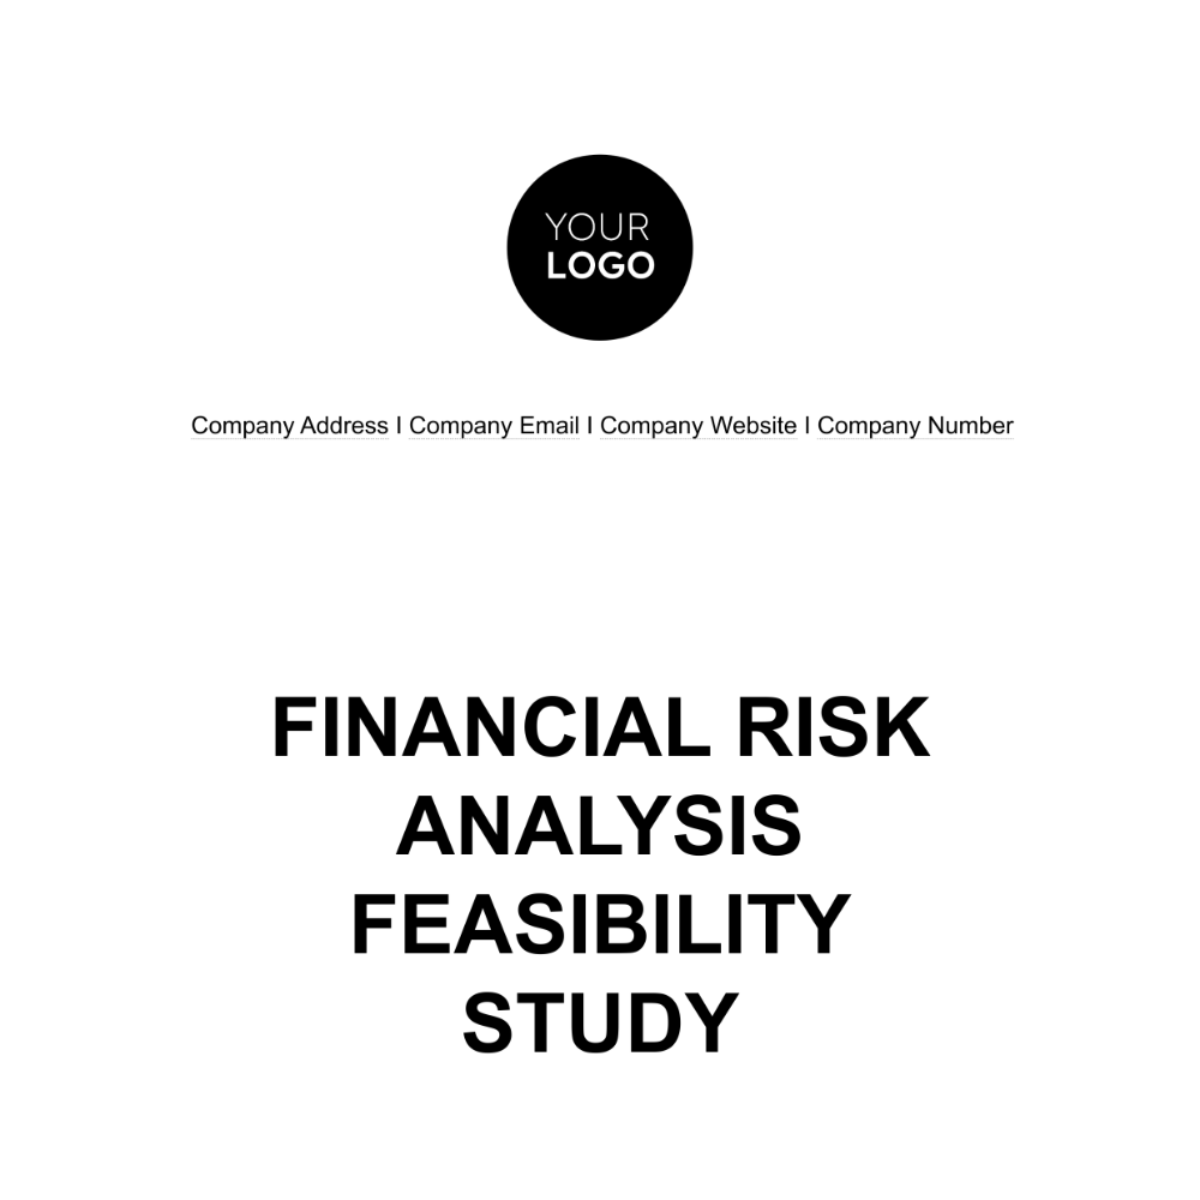 Free Financial Risk Analysis Feasibility Study Template